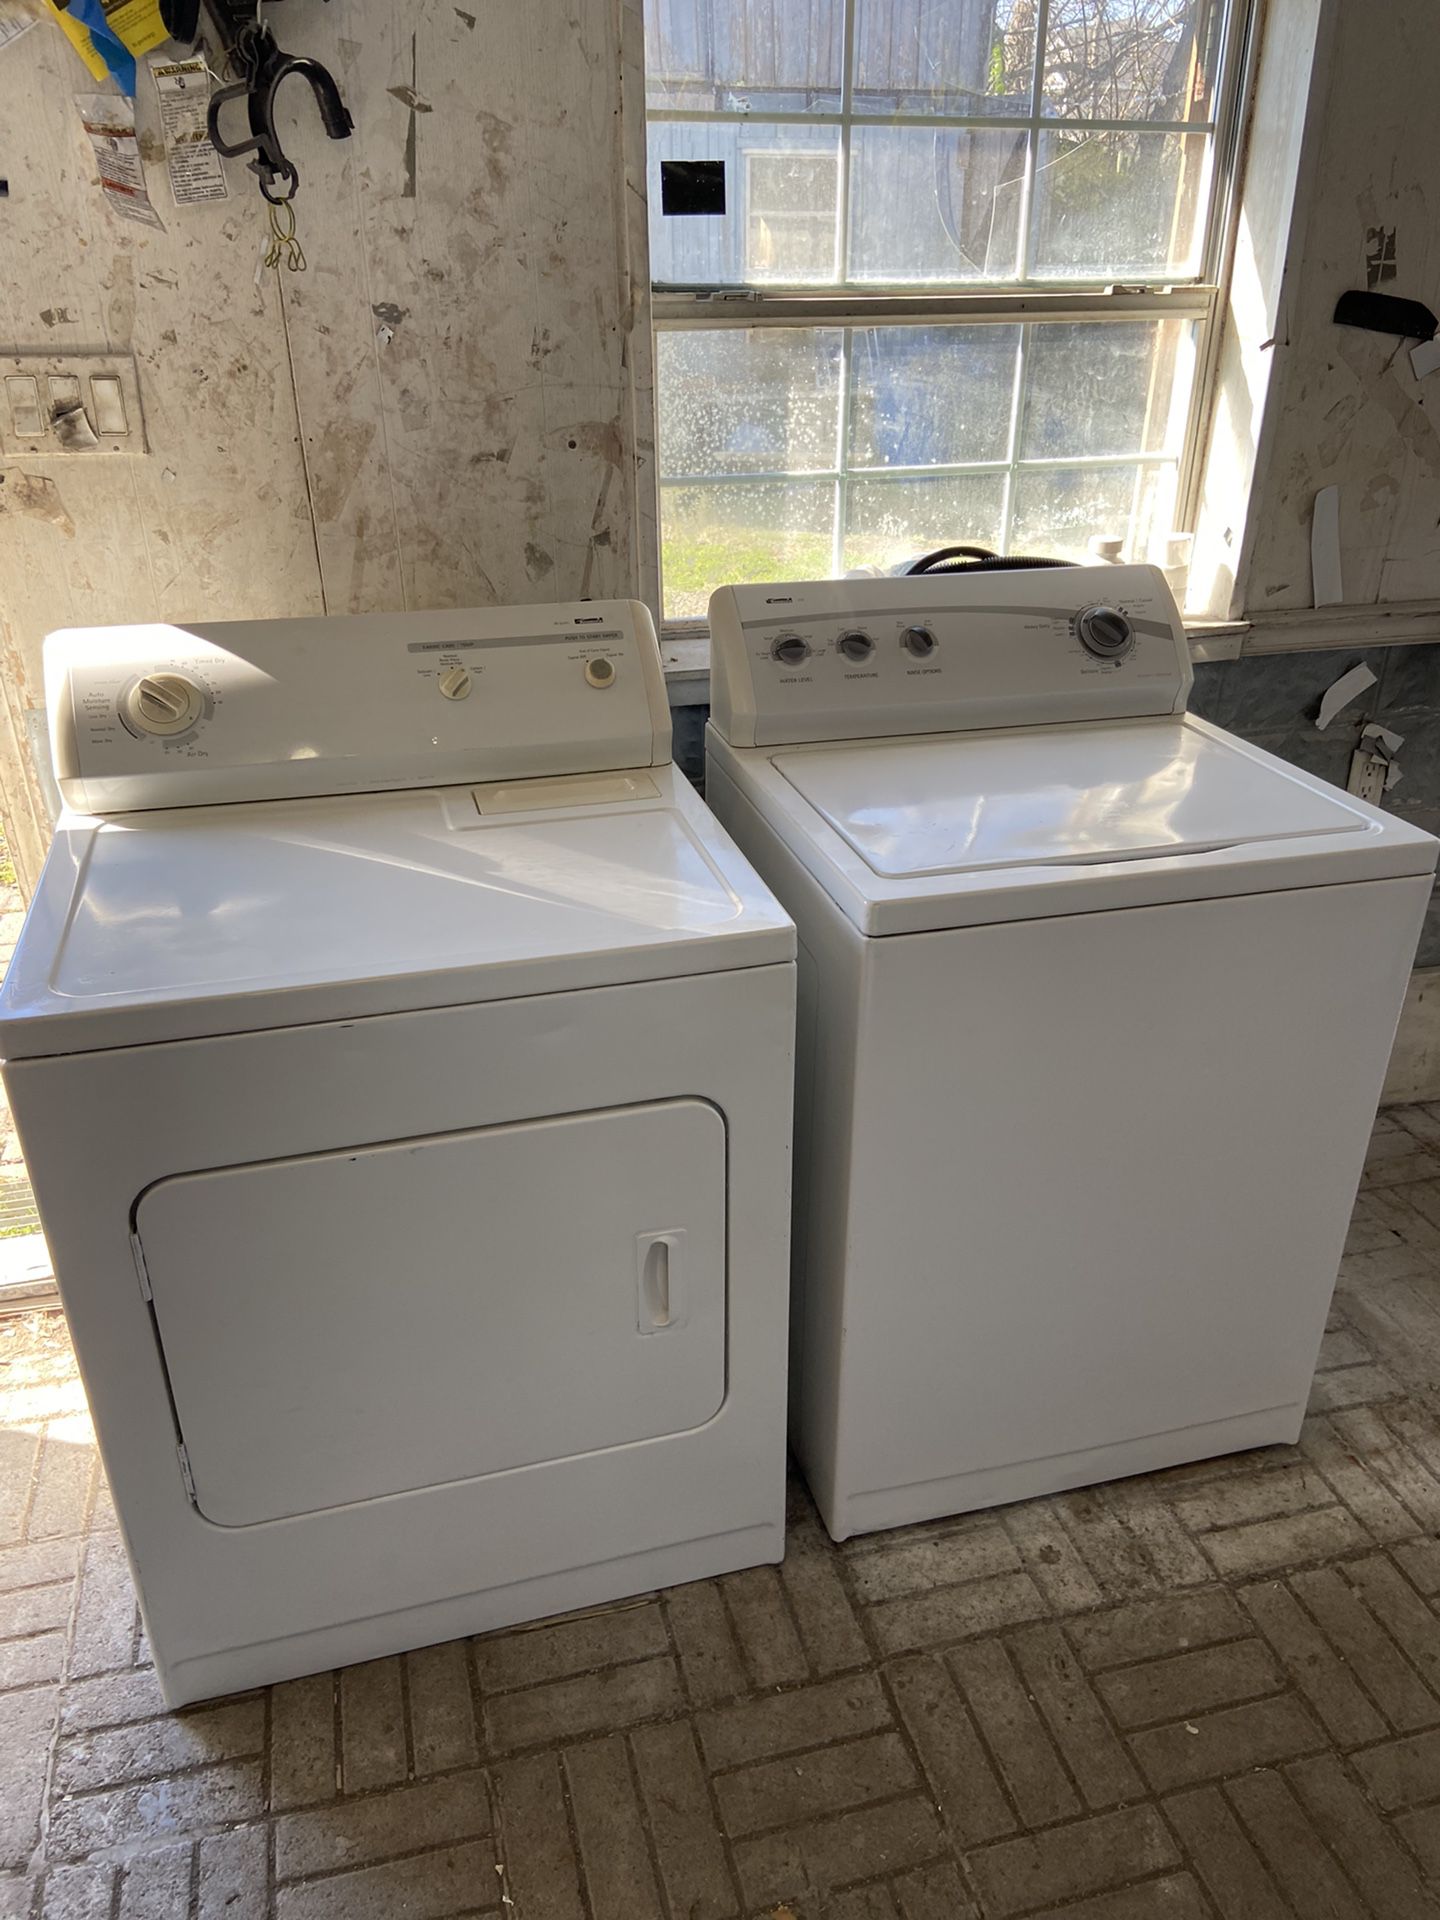 ILL RUN BOTH FOR YOU! KENMORE SUPER LOAD WASHER & KENMORE ELECTRIC DRYER SET! BOTH RUN LIKE NEW! NO ISSUES WITH EITHER! BOTH BEEN CLEANED IN & OUT! IM